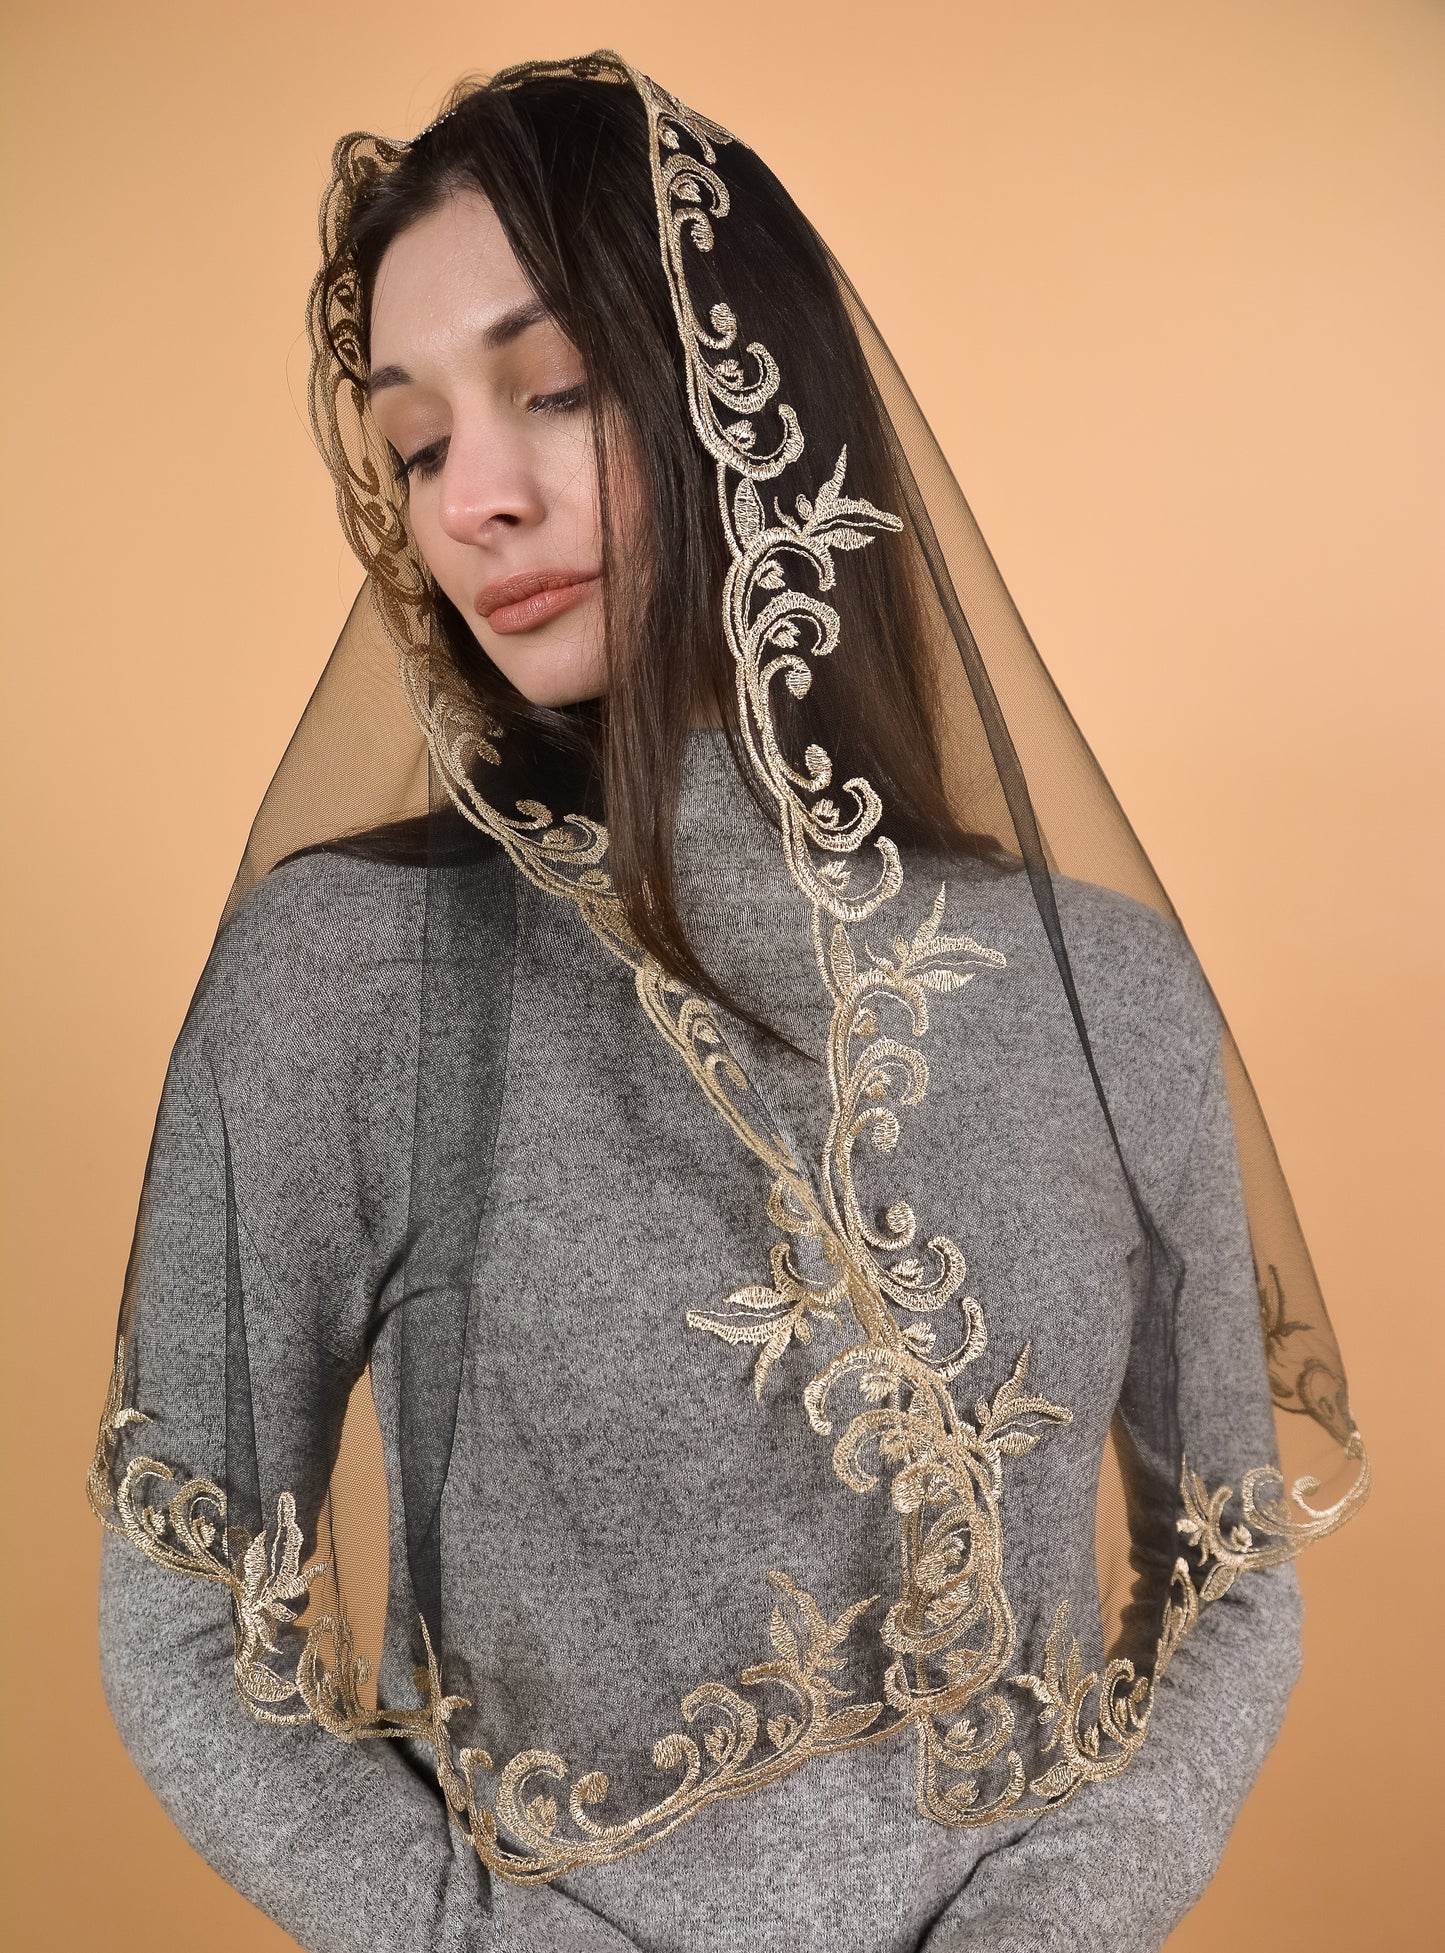 New! Limited Veil